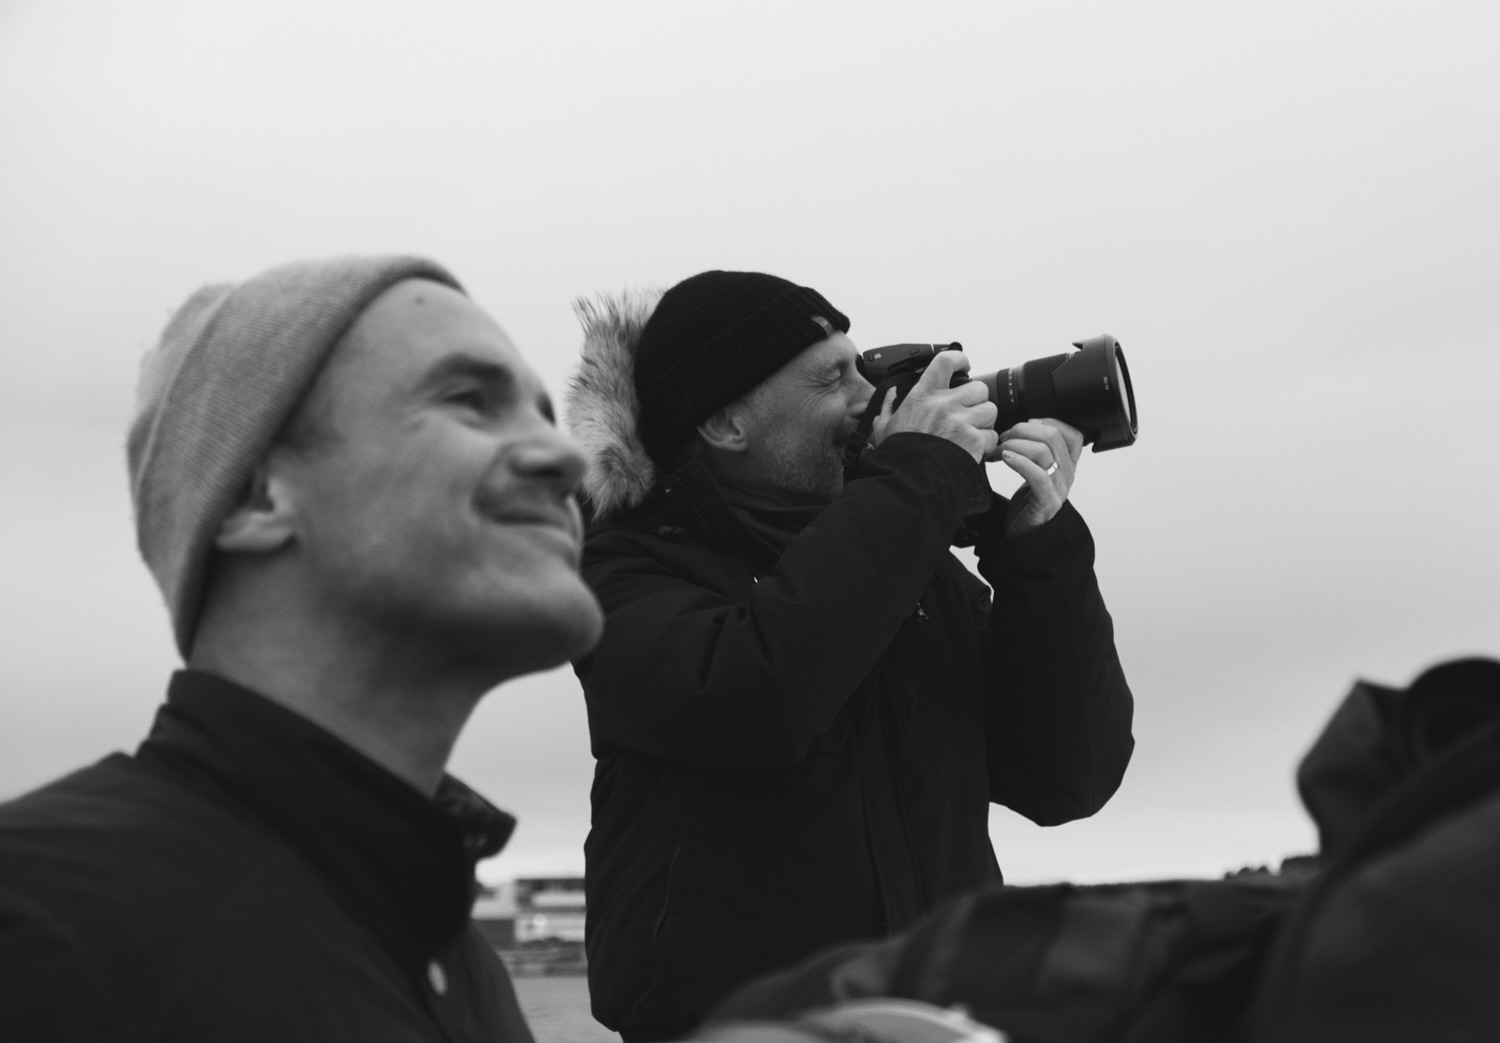 Two men smiling, one looking through a camera lense